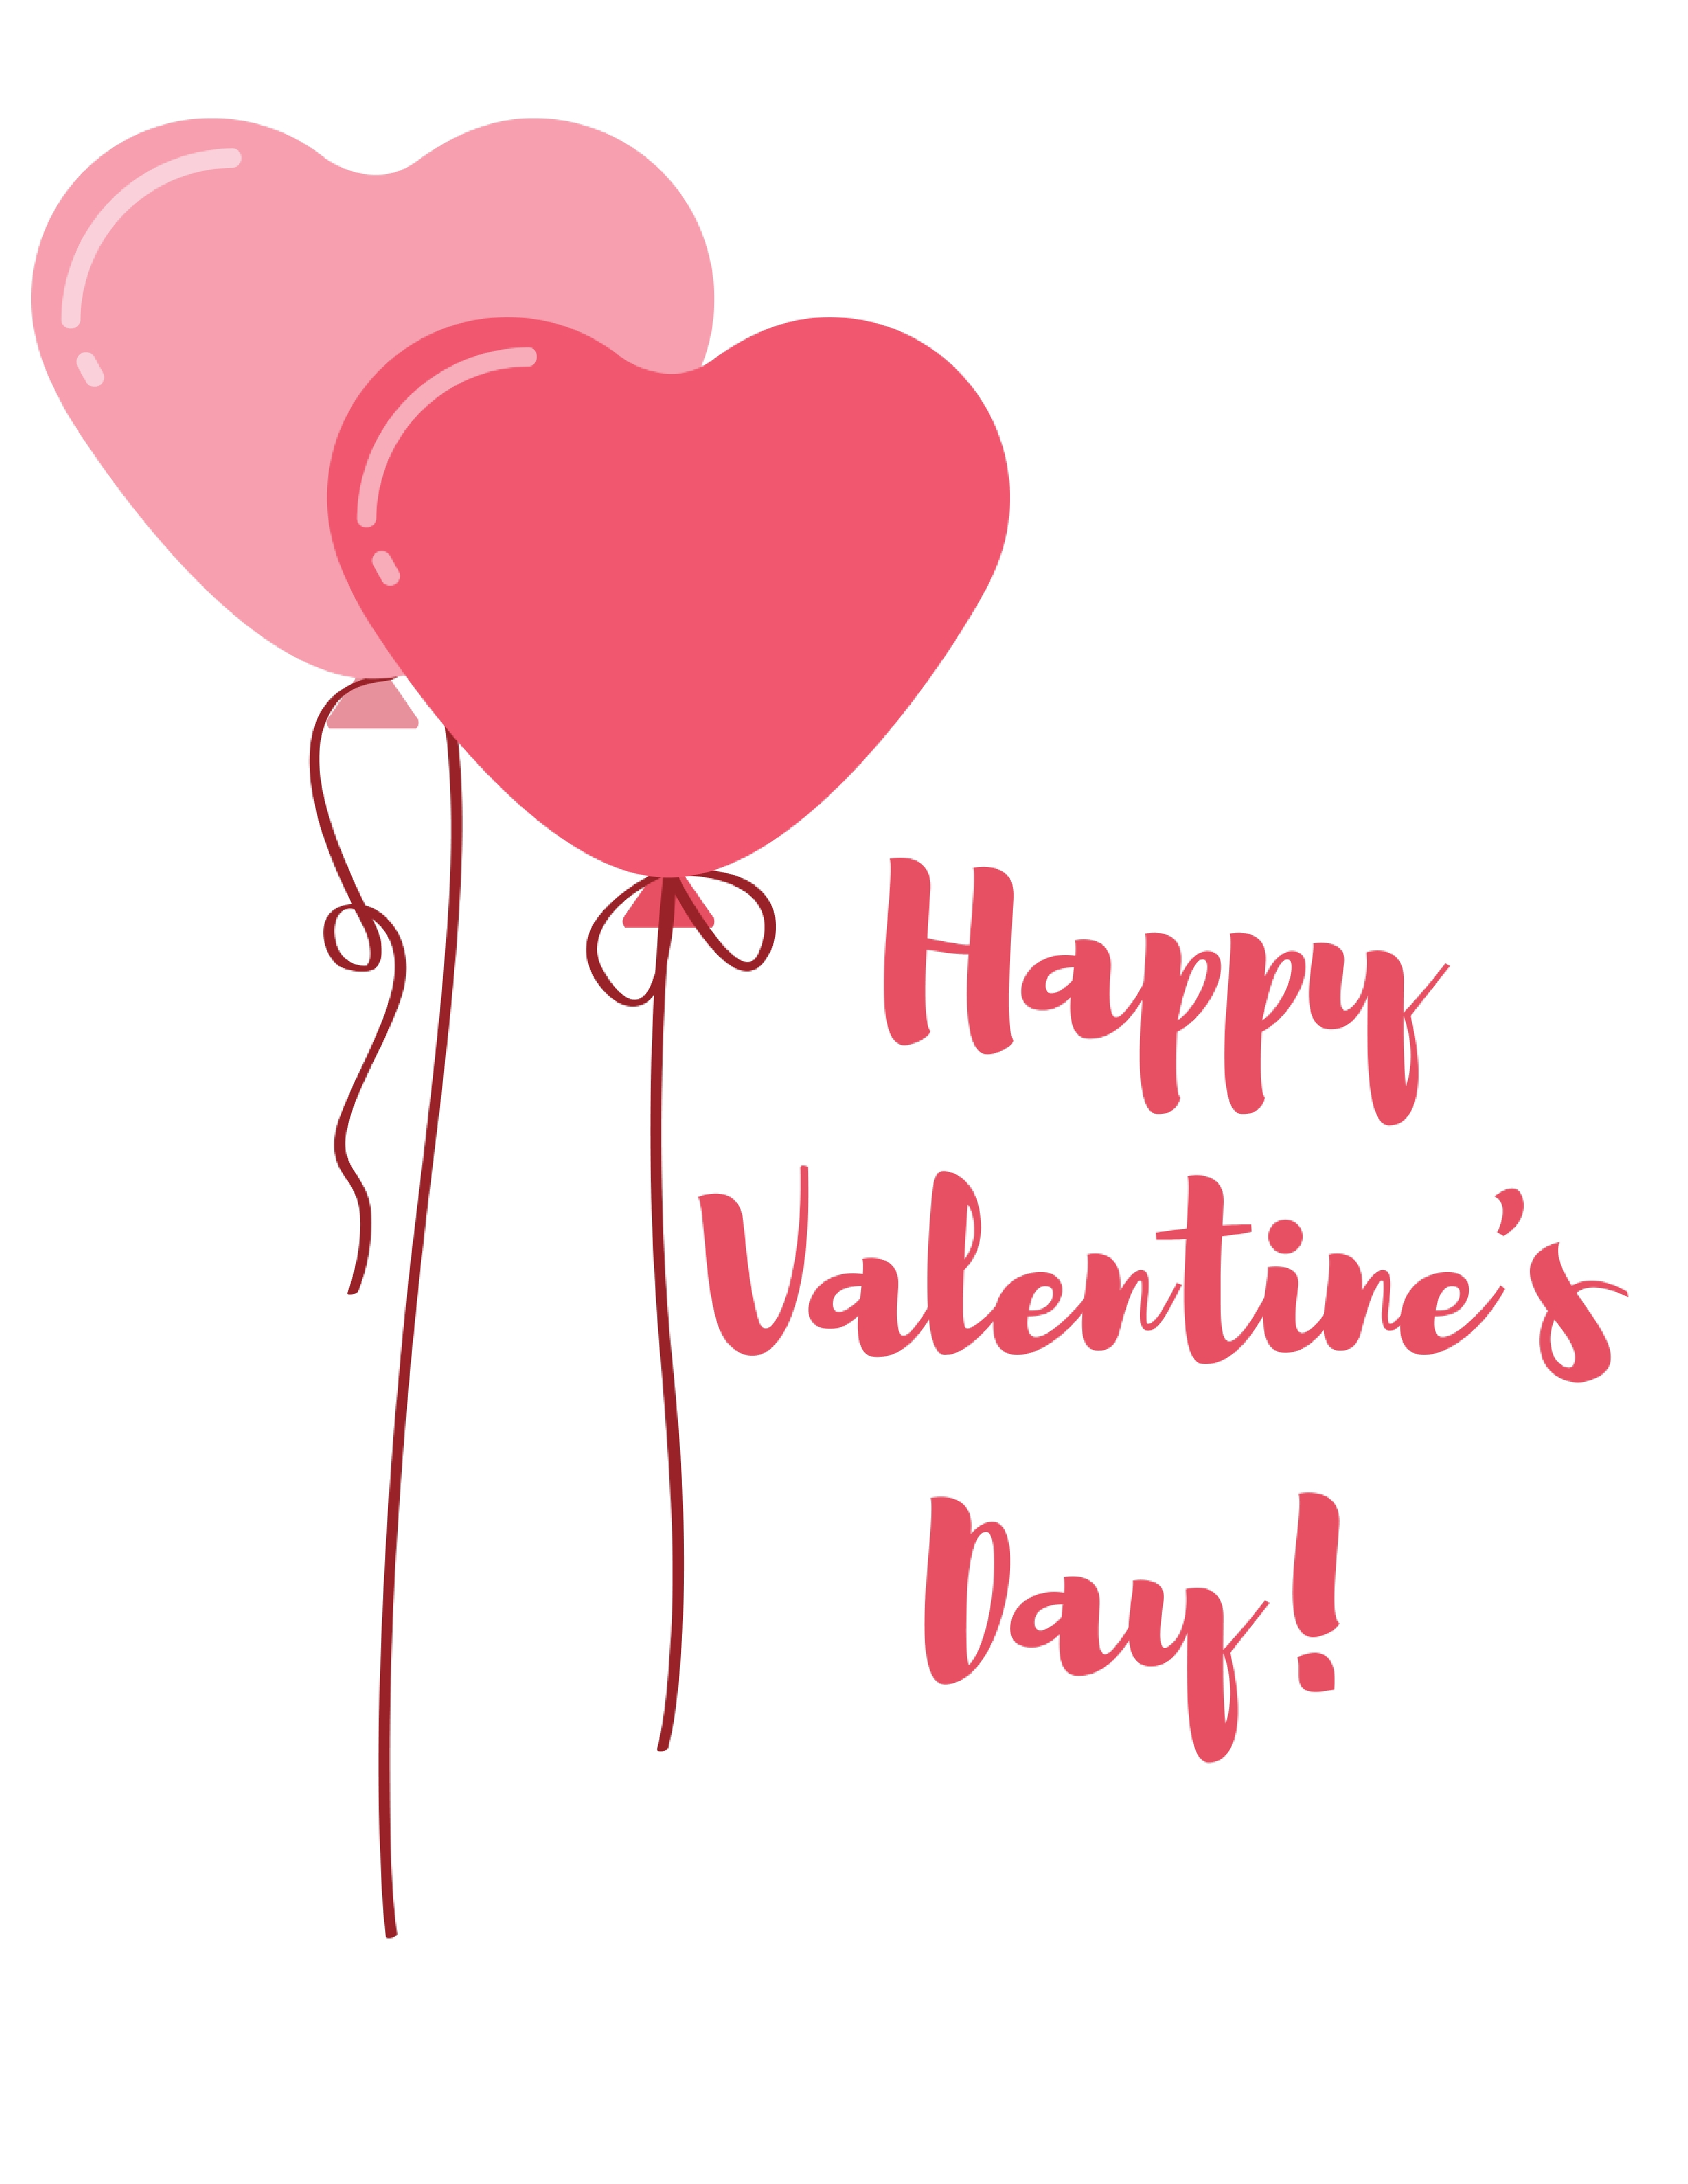 5-free-valentine-s-day-printables-the-little-frugal-house